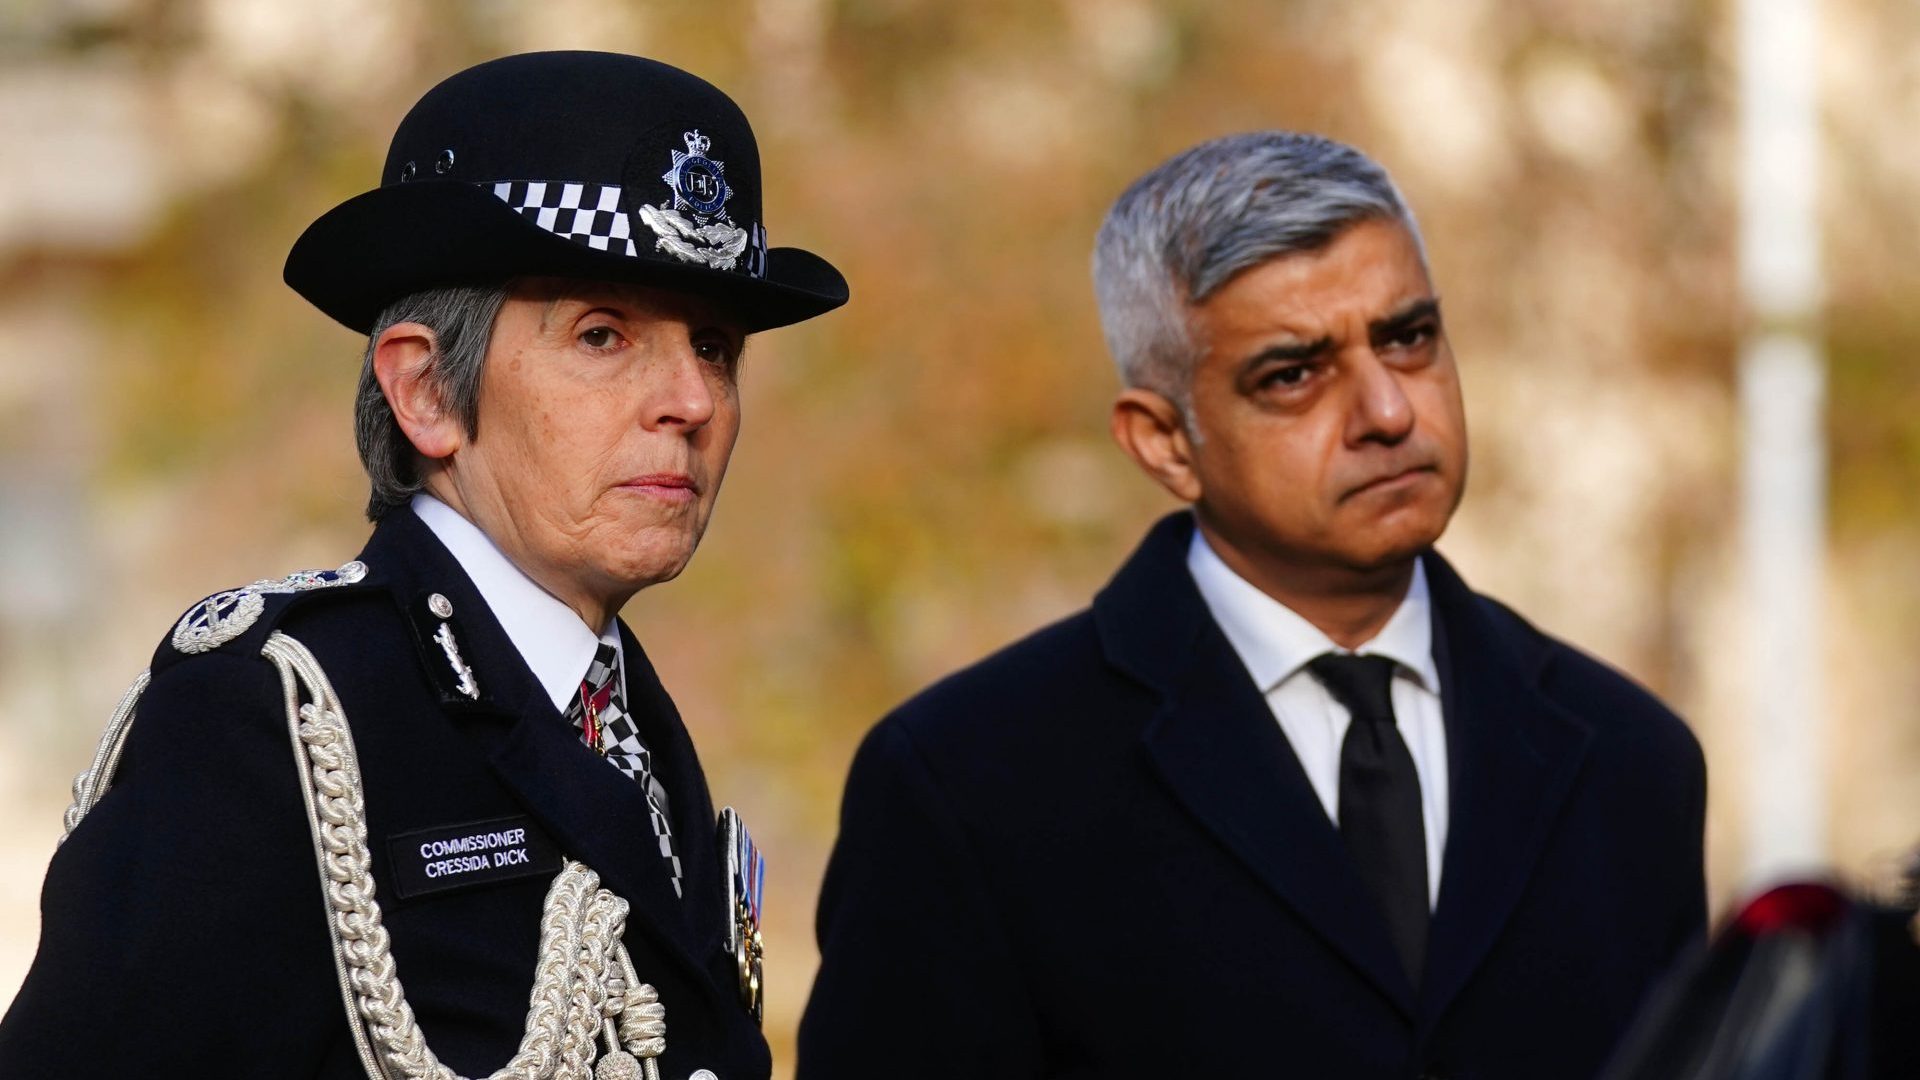 Cressida Dick has resigned as Commissioner of the Metropolitan Police Service. Photo: Victoria Jones/PA Wire/PA Images